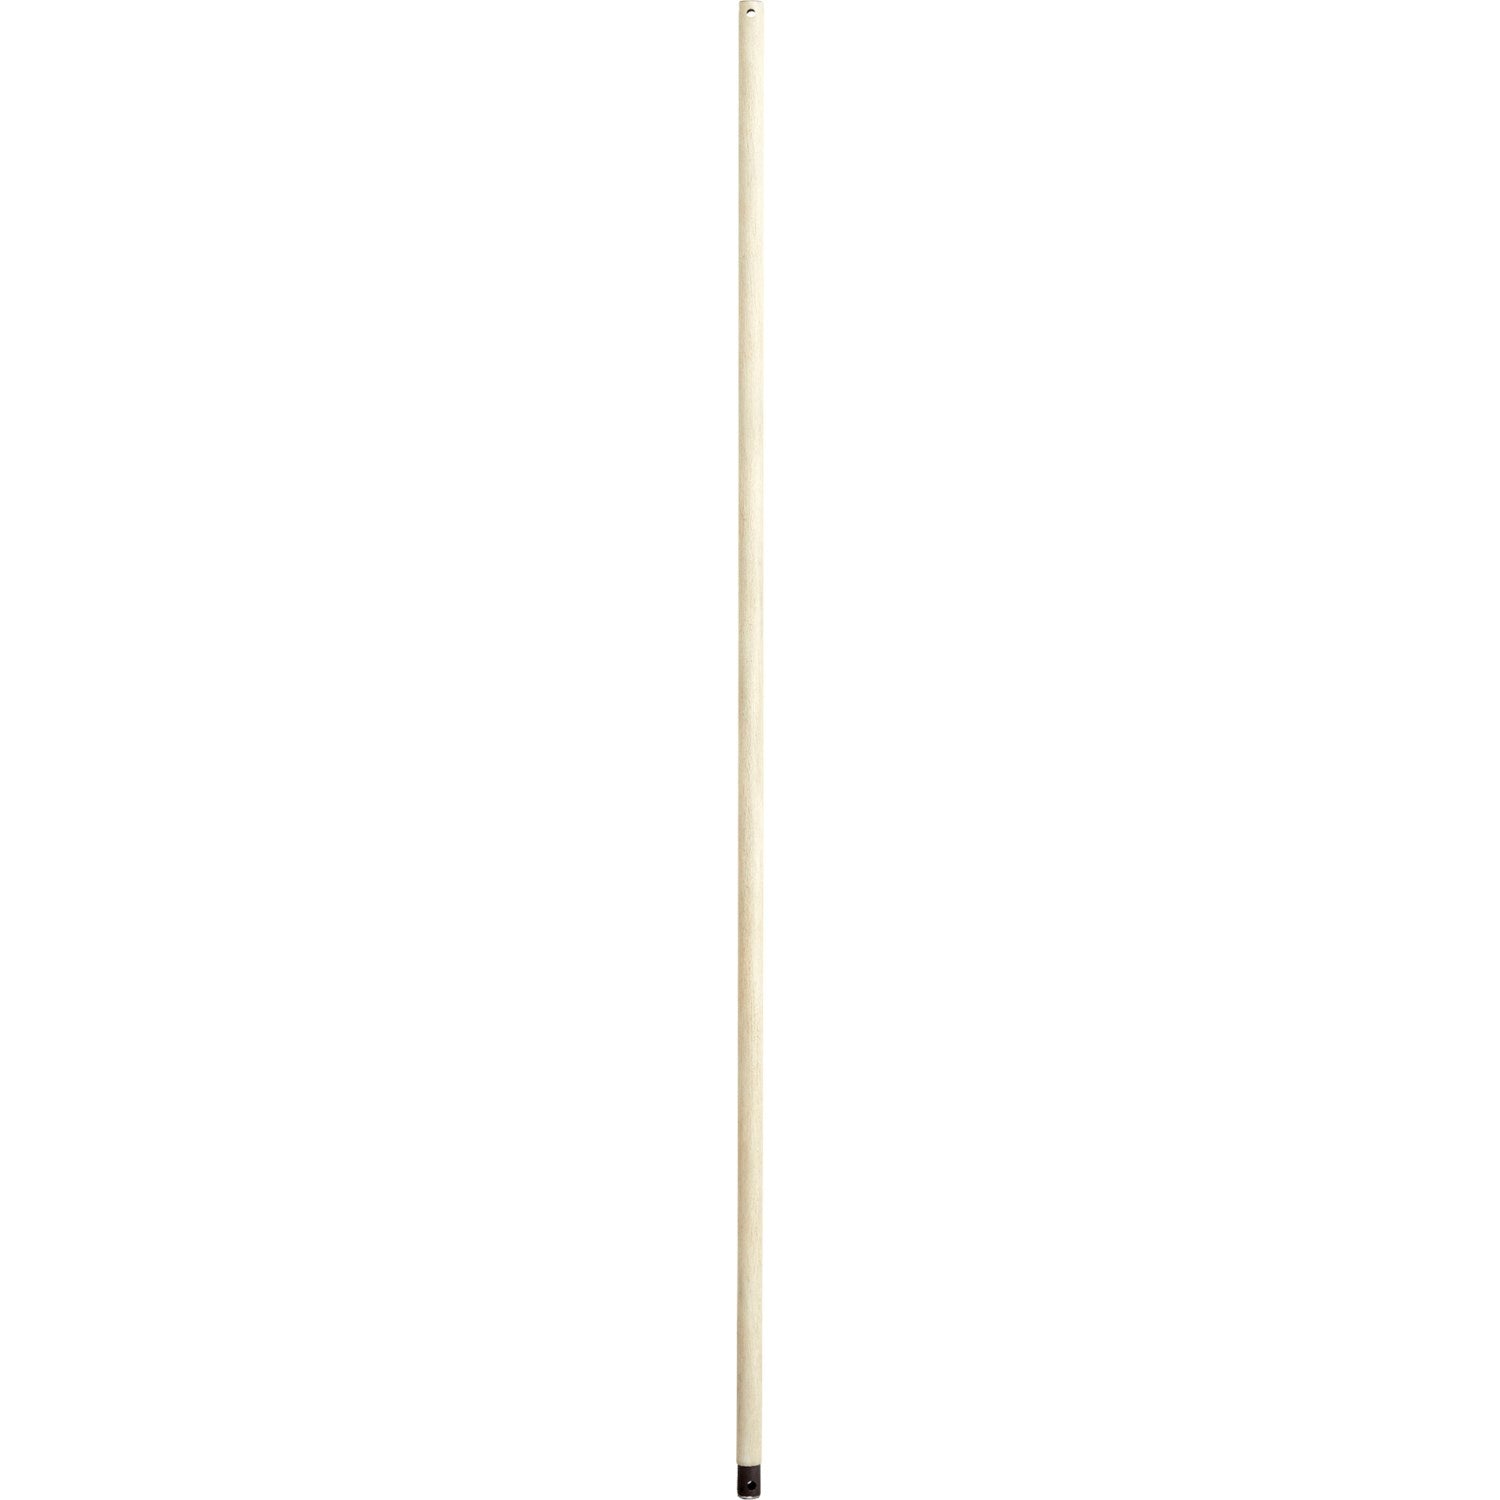 Quorum - 6-4870 - 48" Universal Downrod - 48 in. Downrods - Persian White